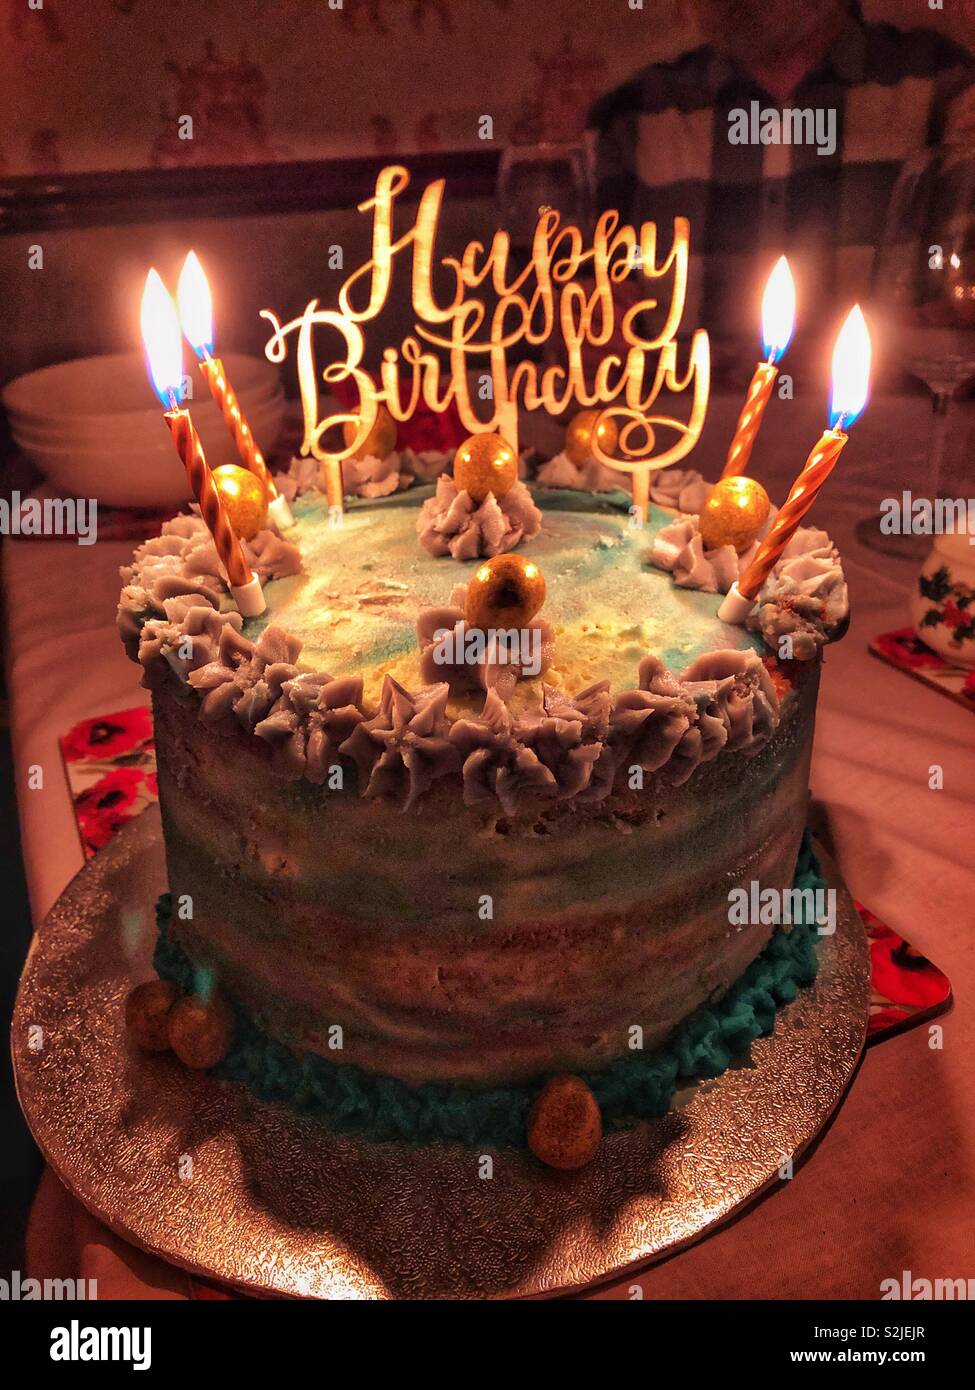 Birthday cake with candles Stock Photo - Alamy